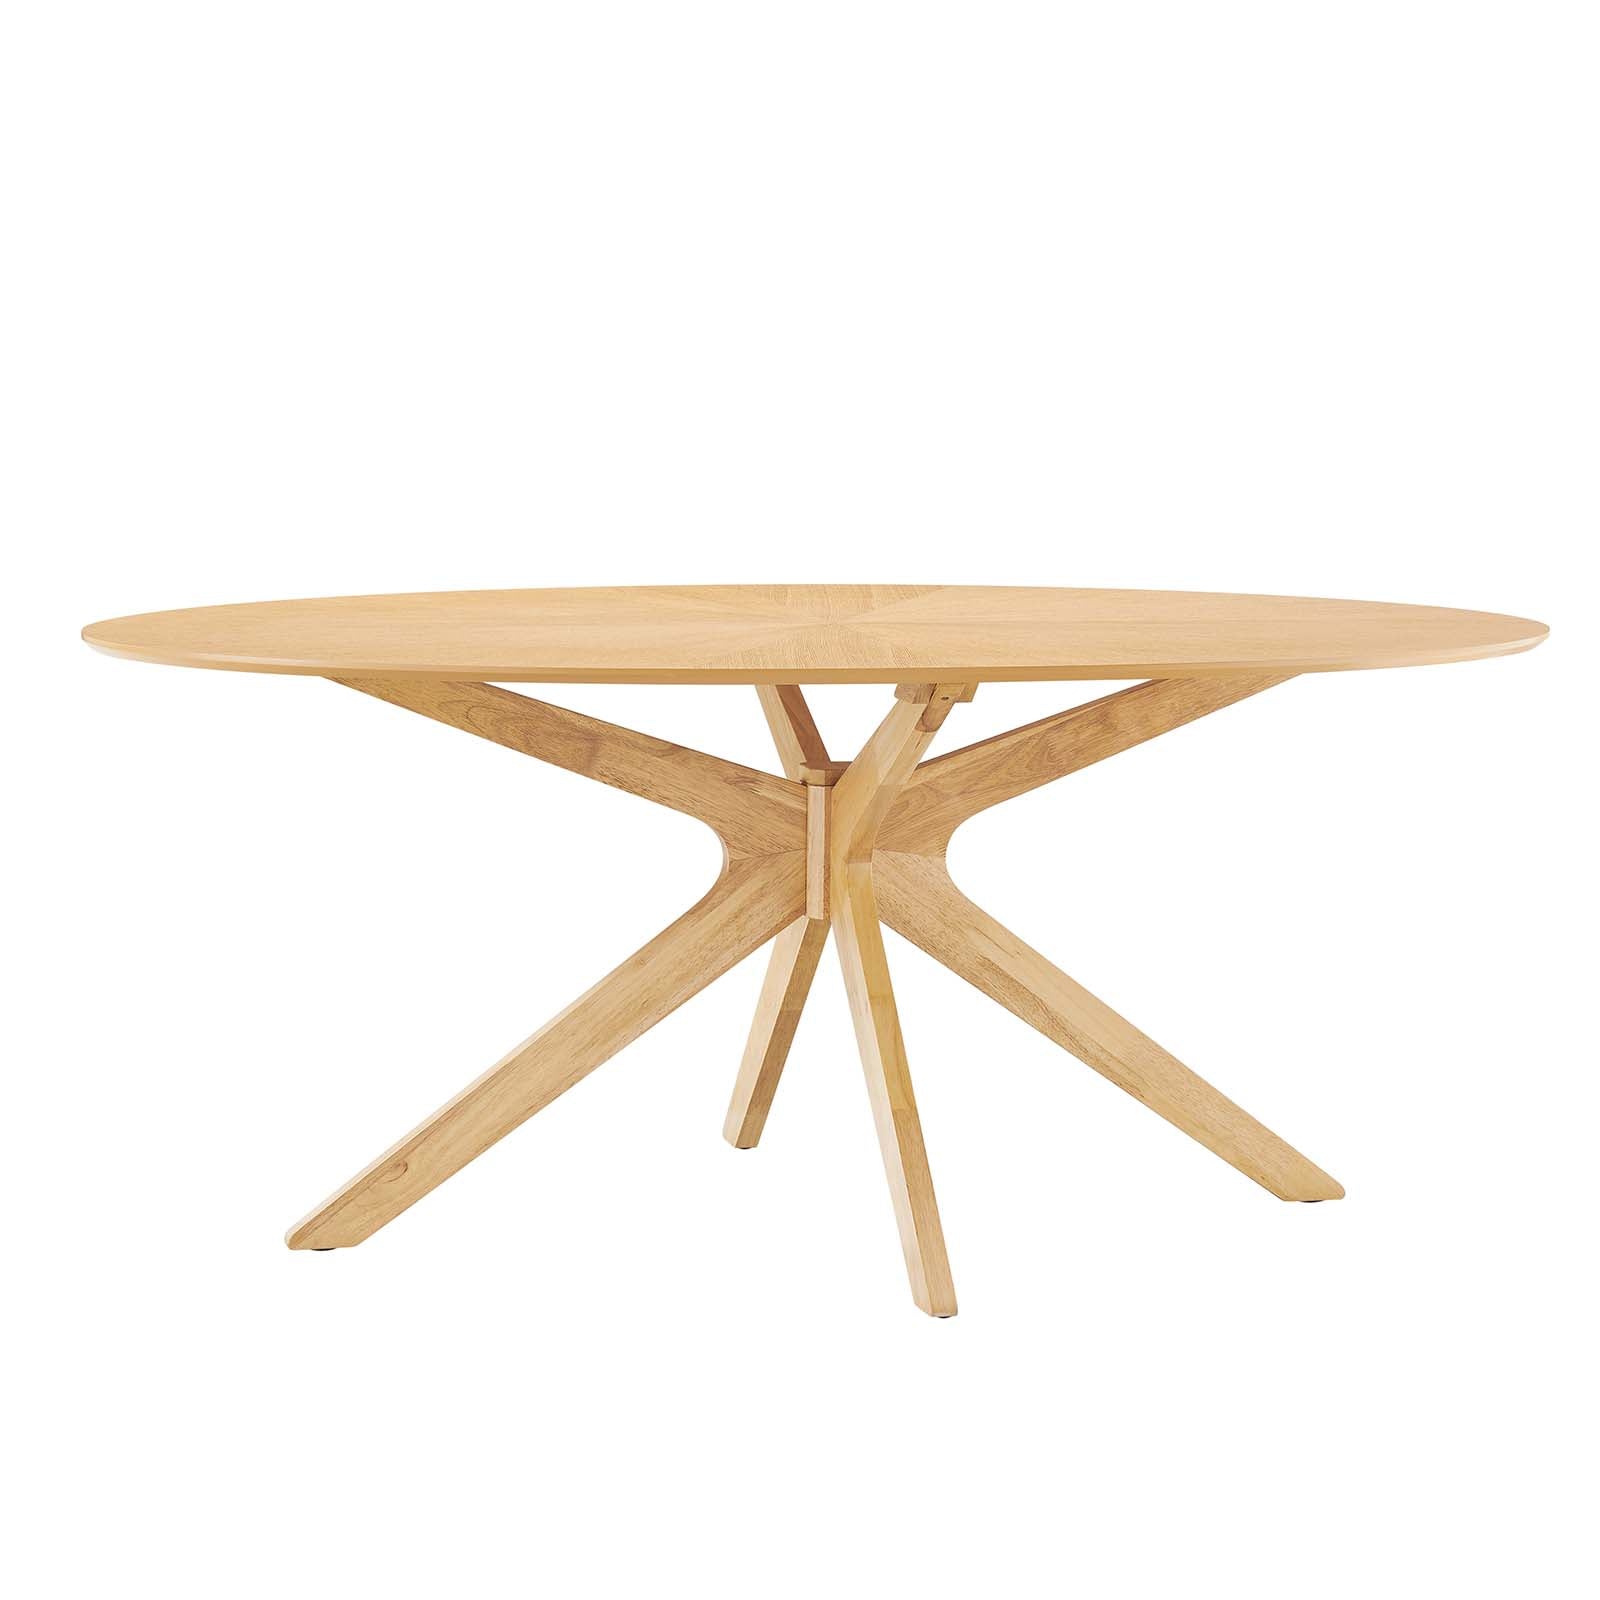 Crossroads 71" Oval Wood Dining Table - East Shore Modern Home Furnishings